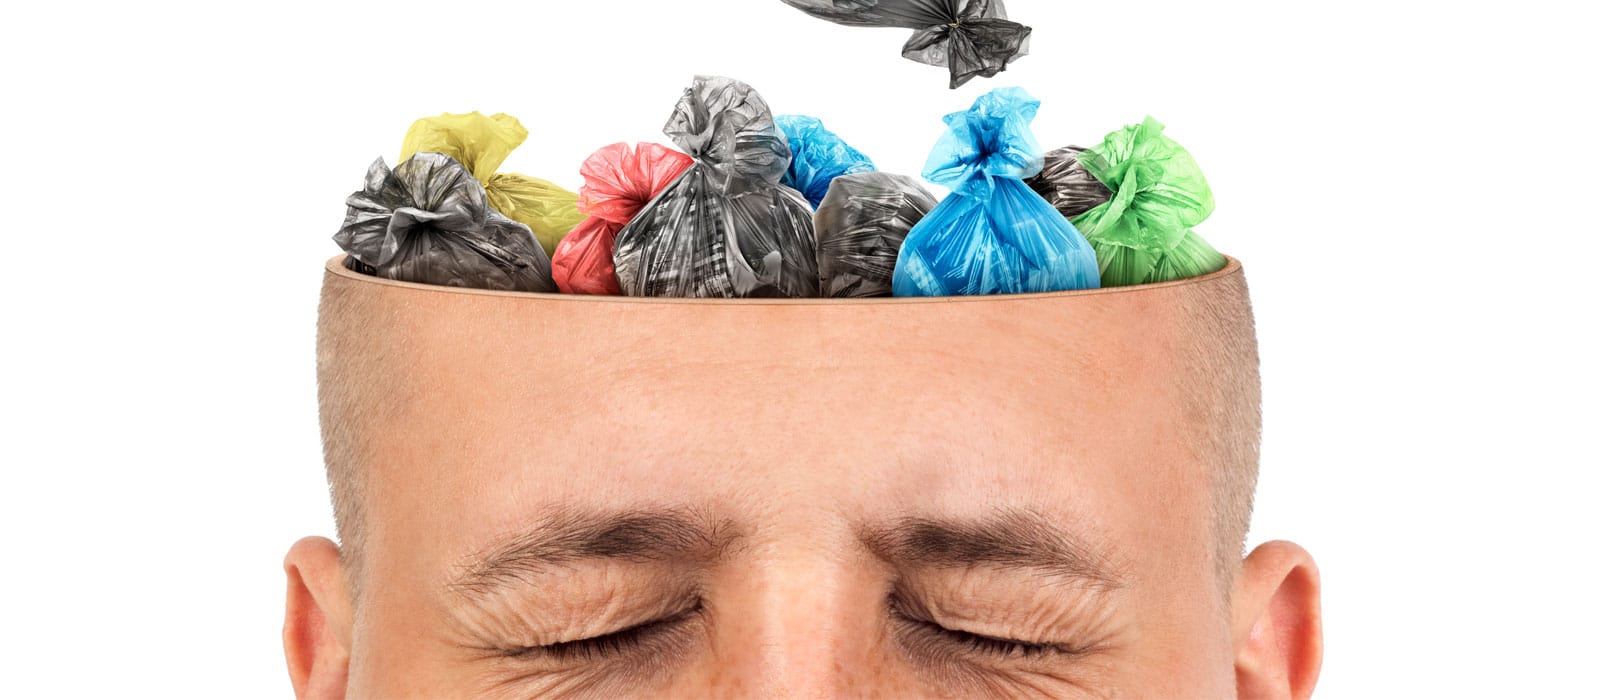 Taking Out Your Head Trash: Secrets of Top Performers